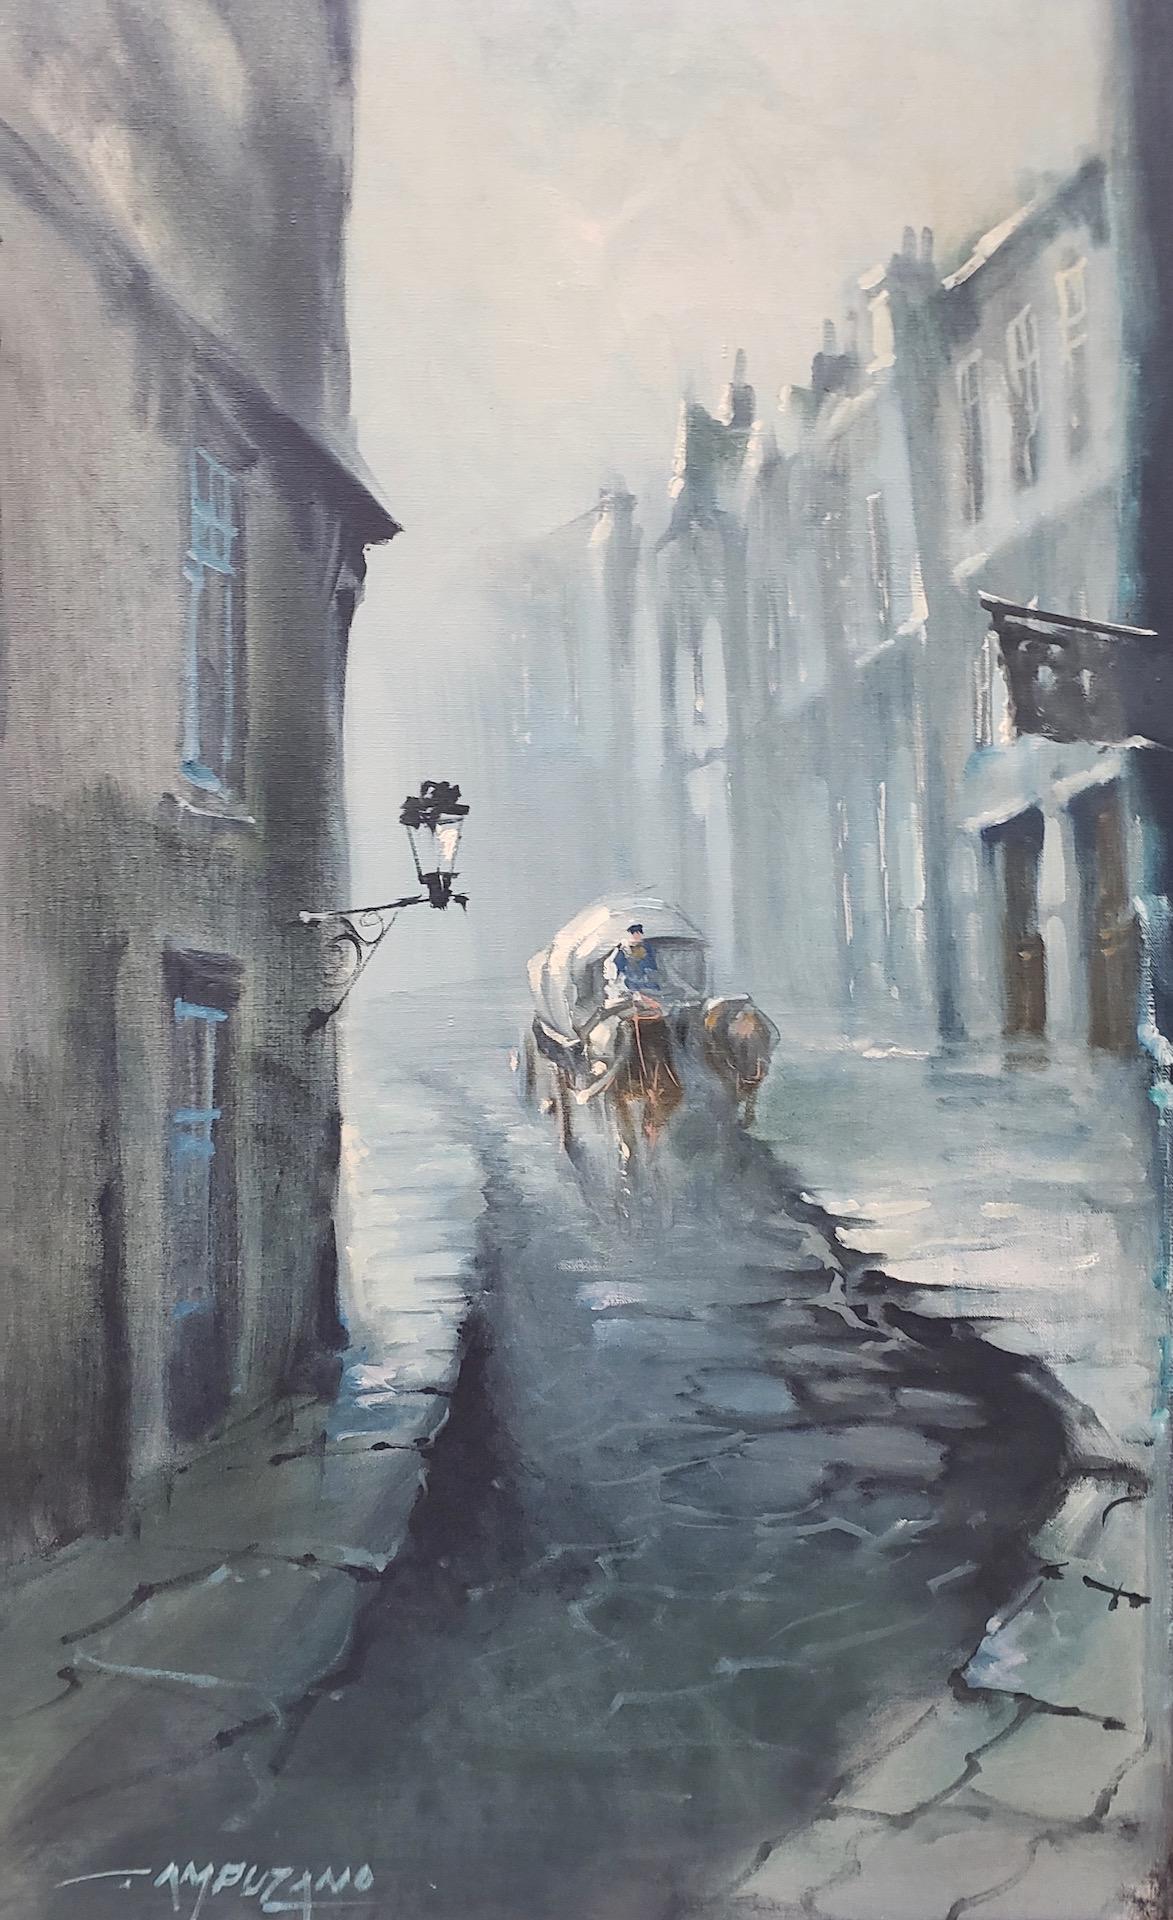 Jose Campuzano (1918-1979) original oil painting, circa 1960s

A carriage coming down a cobbled street. The early morning light illuminates the path.

Original oil on canvas. Dimensions: 24